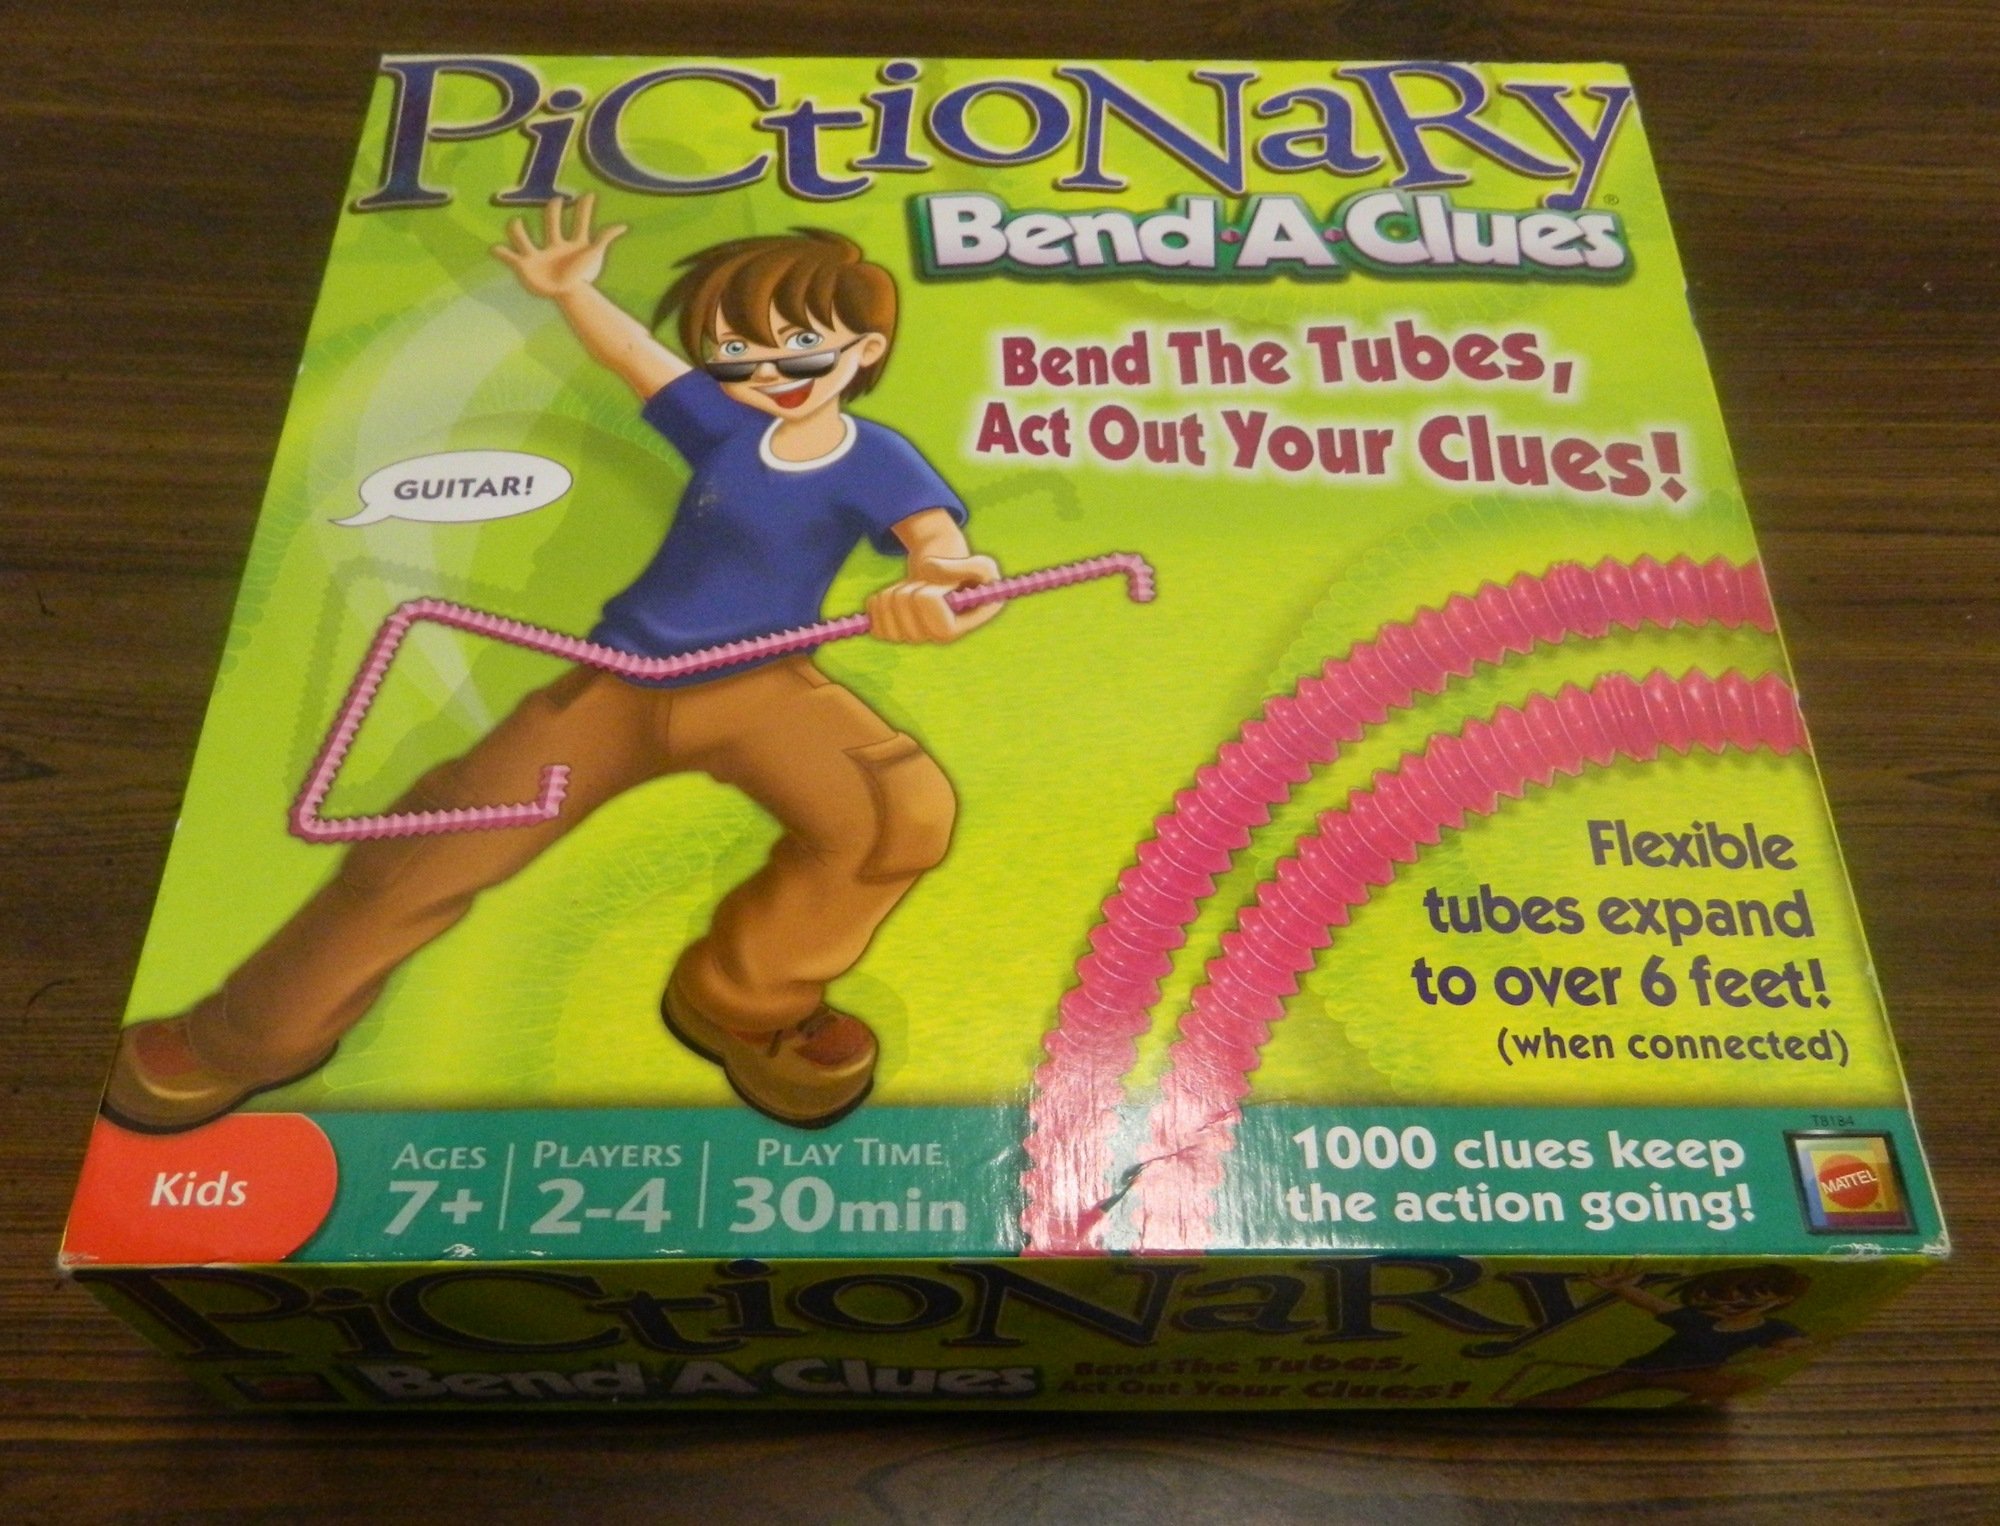 Pictionary Bend-A-Clues Board Game Review and Rules